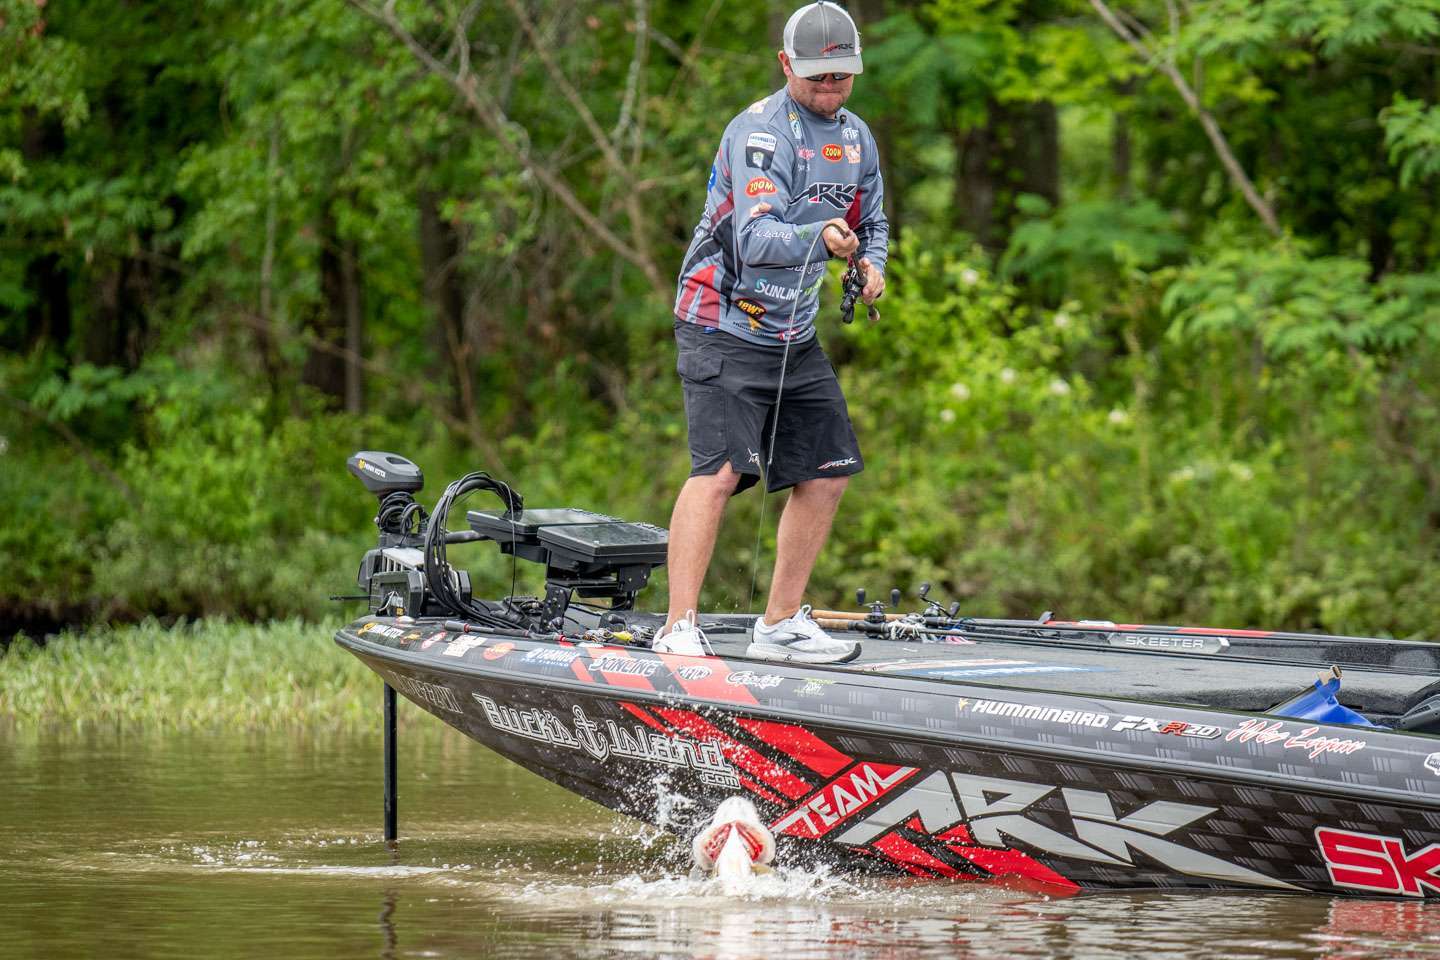 A postponed day, near-flood conditions and falling water. The pros faced all those conditions to set up a challenging tournament at the Whataburger Bassmaster Elite at Neely Henry Lake.  <br><br> <em>All captions: Craig Lamb</em> 